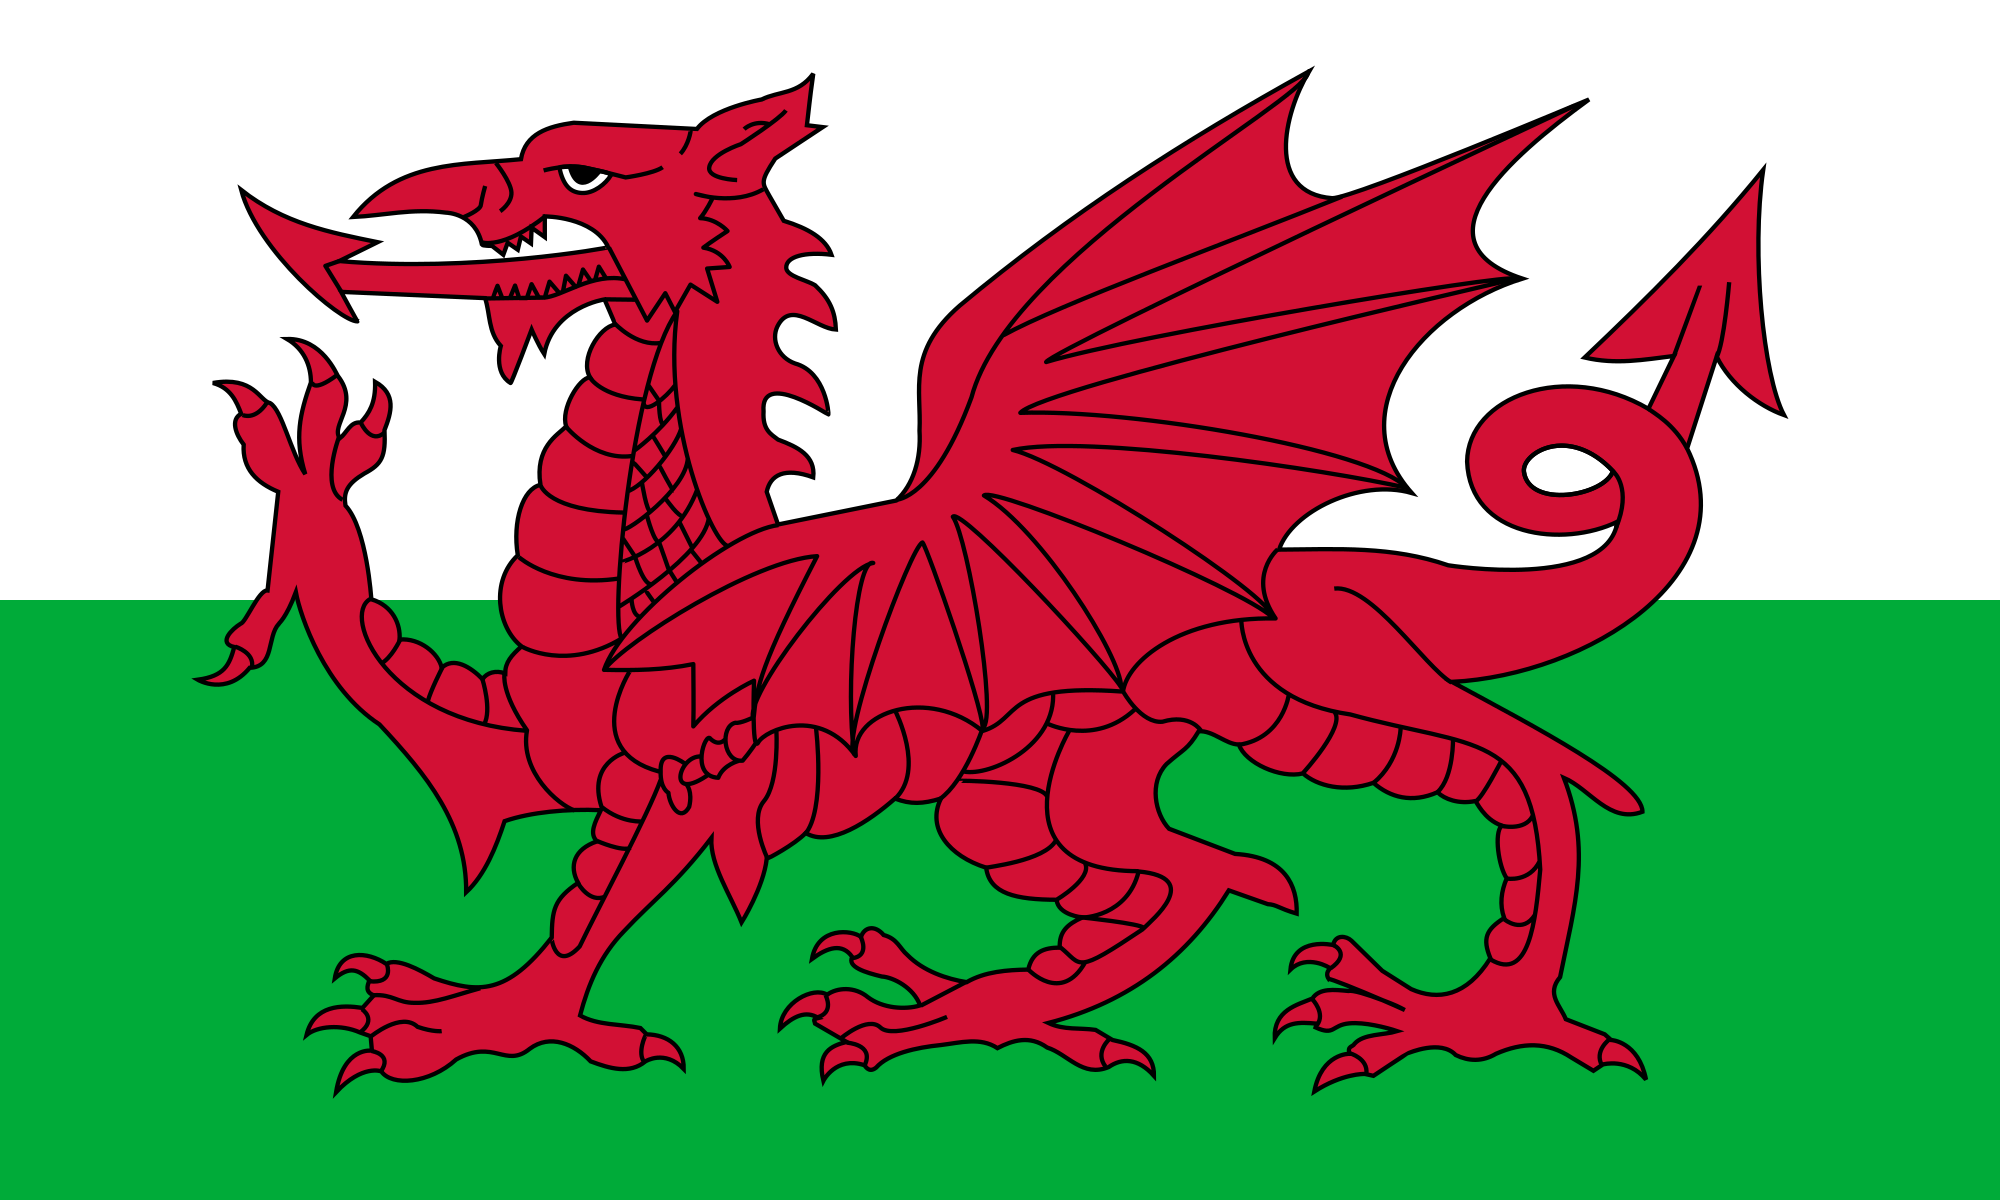 This user is Welsh